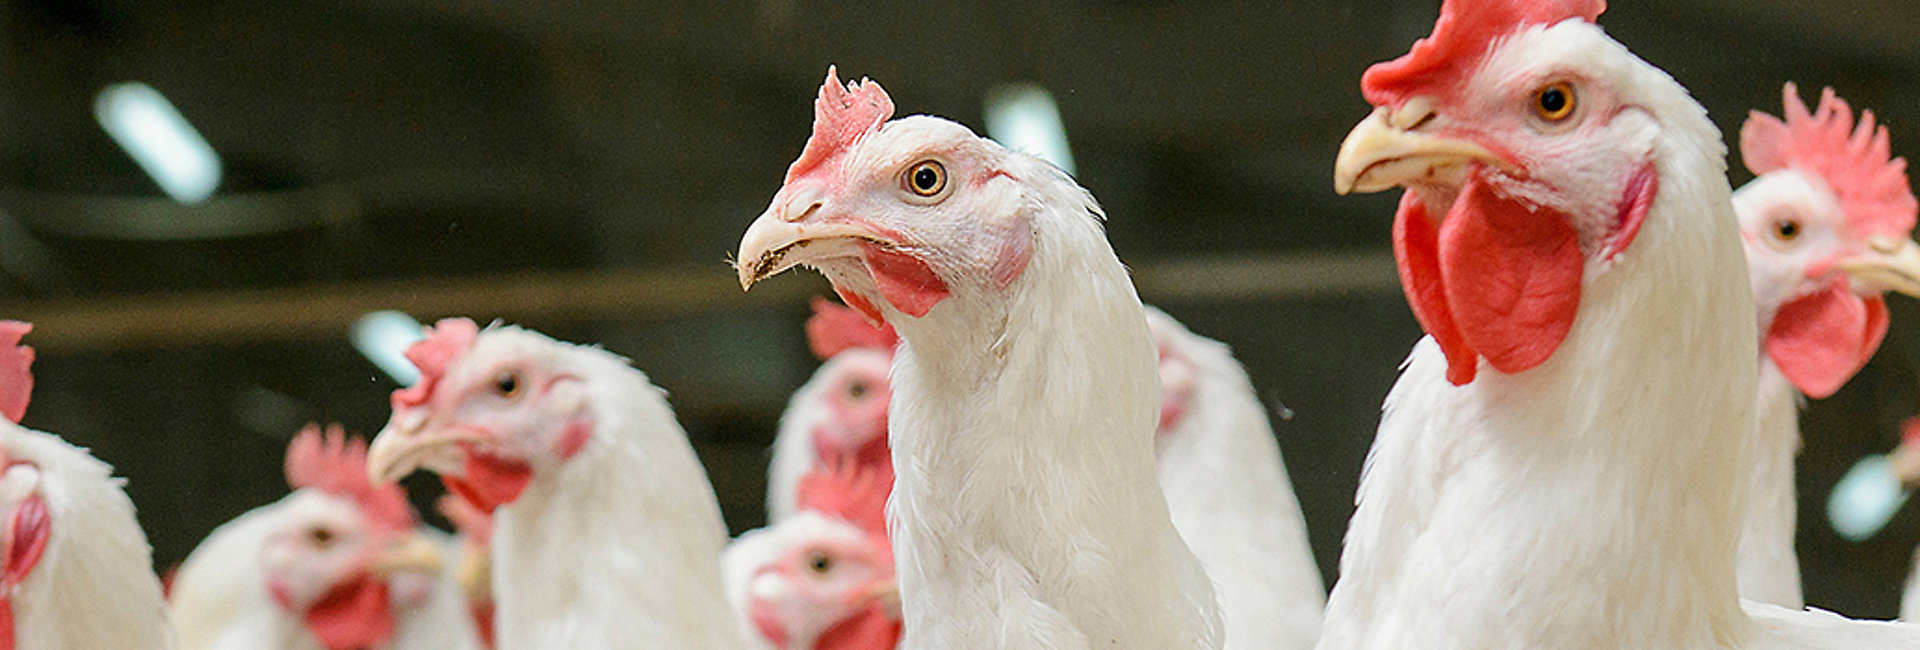 Nutrition Solutions for Poultry | Kemin Animal Nutrition & Health - Canada